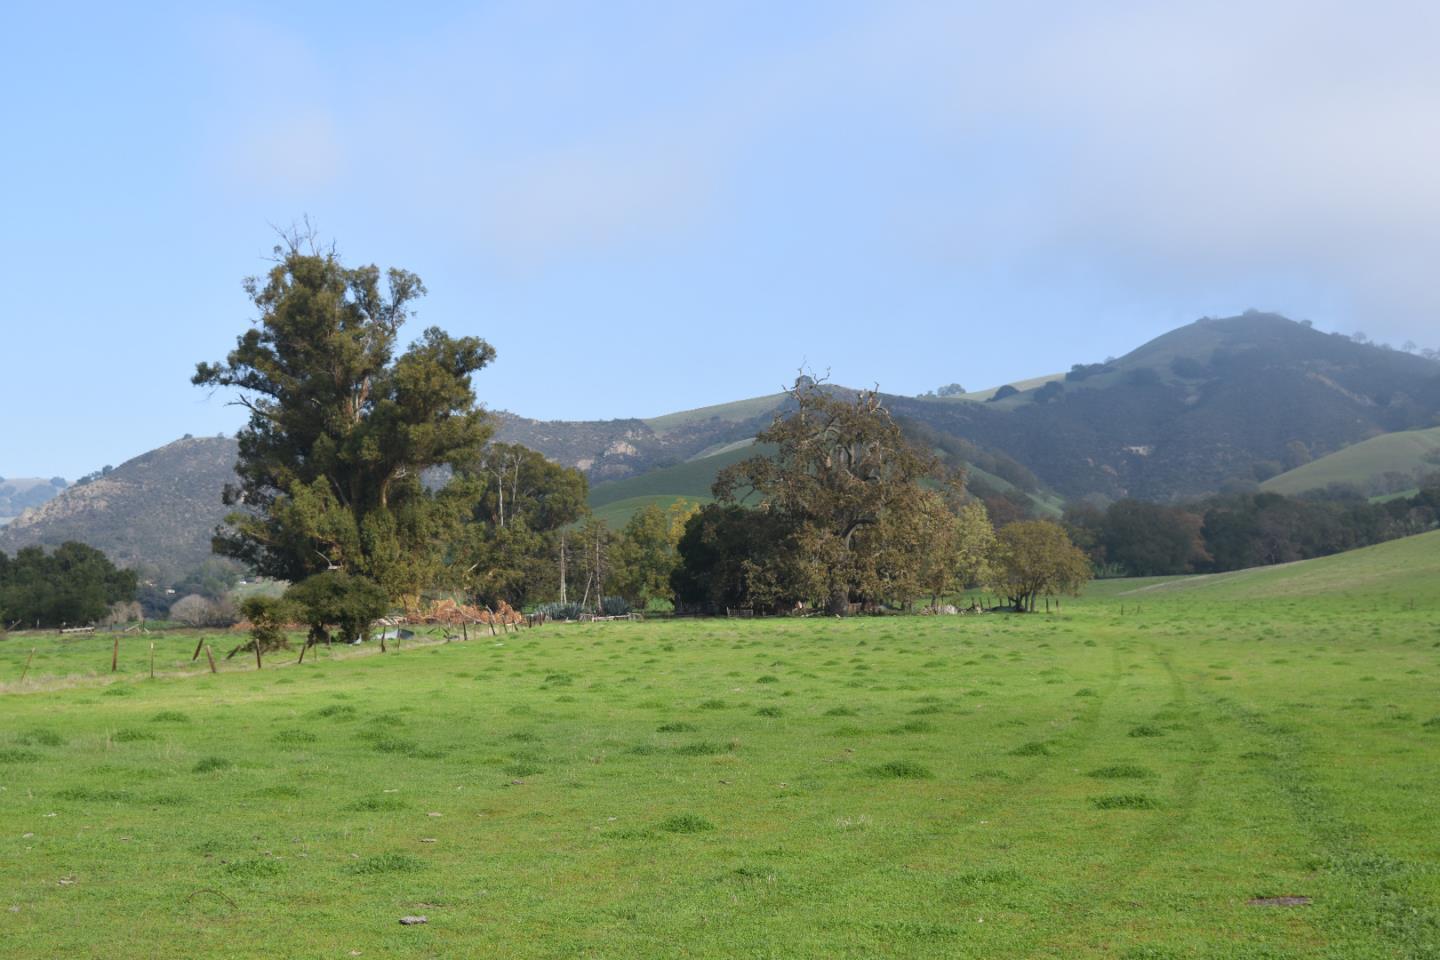 a view of grassy field with mountain in the background